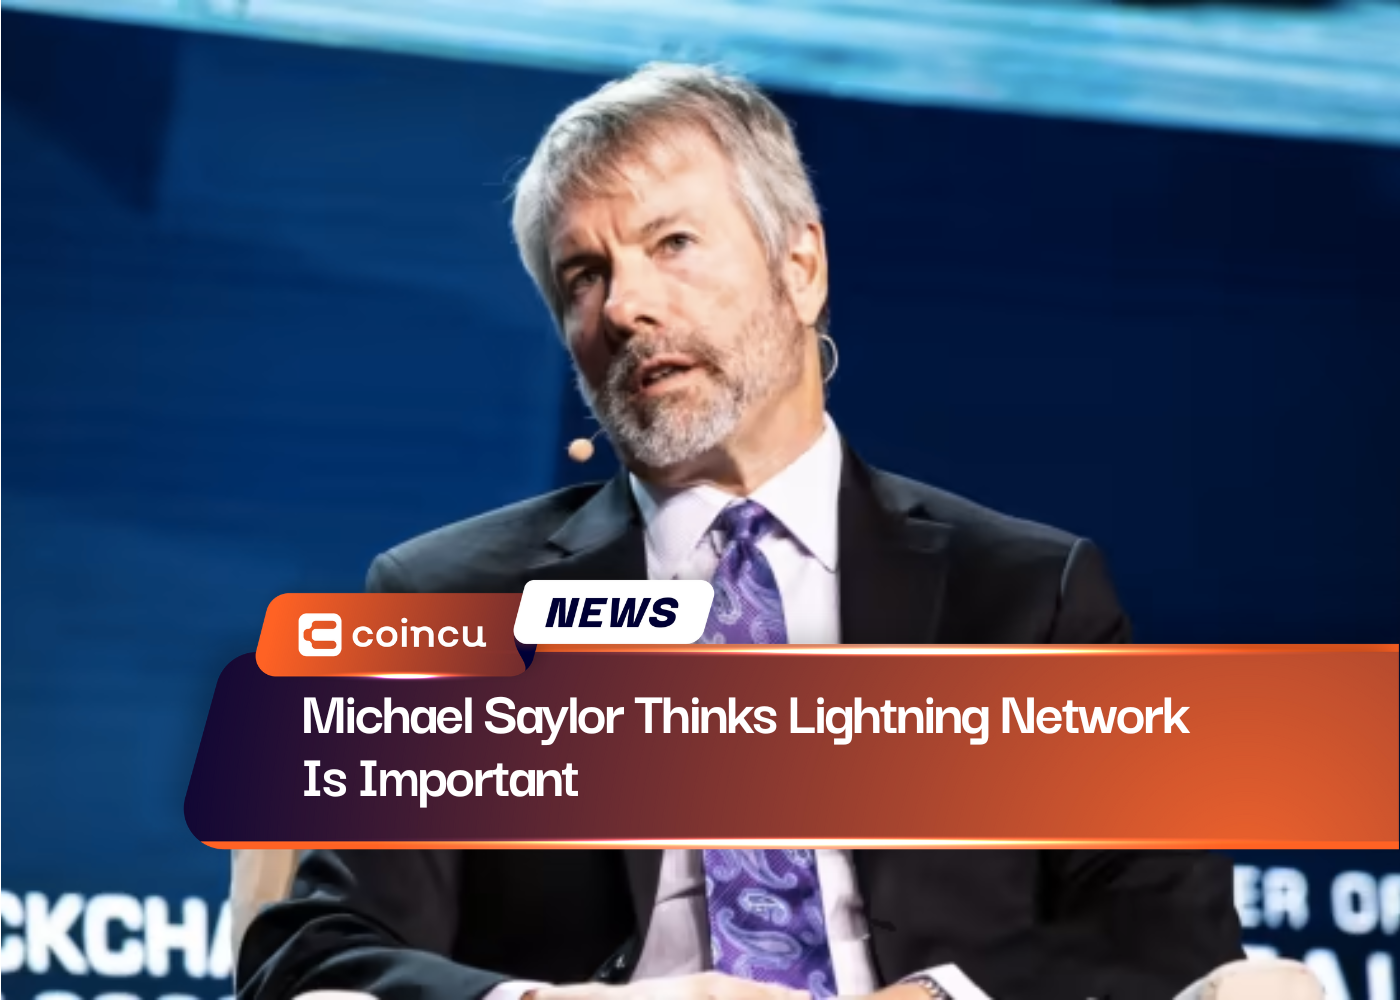 Michael Saylor Thinks Lightning Network Is Important